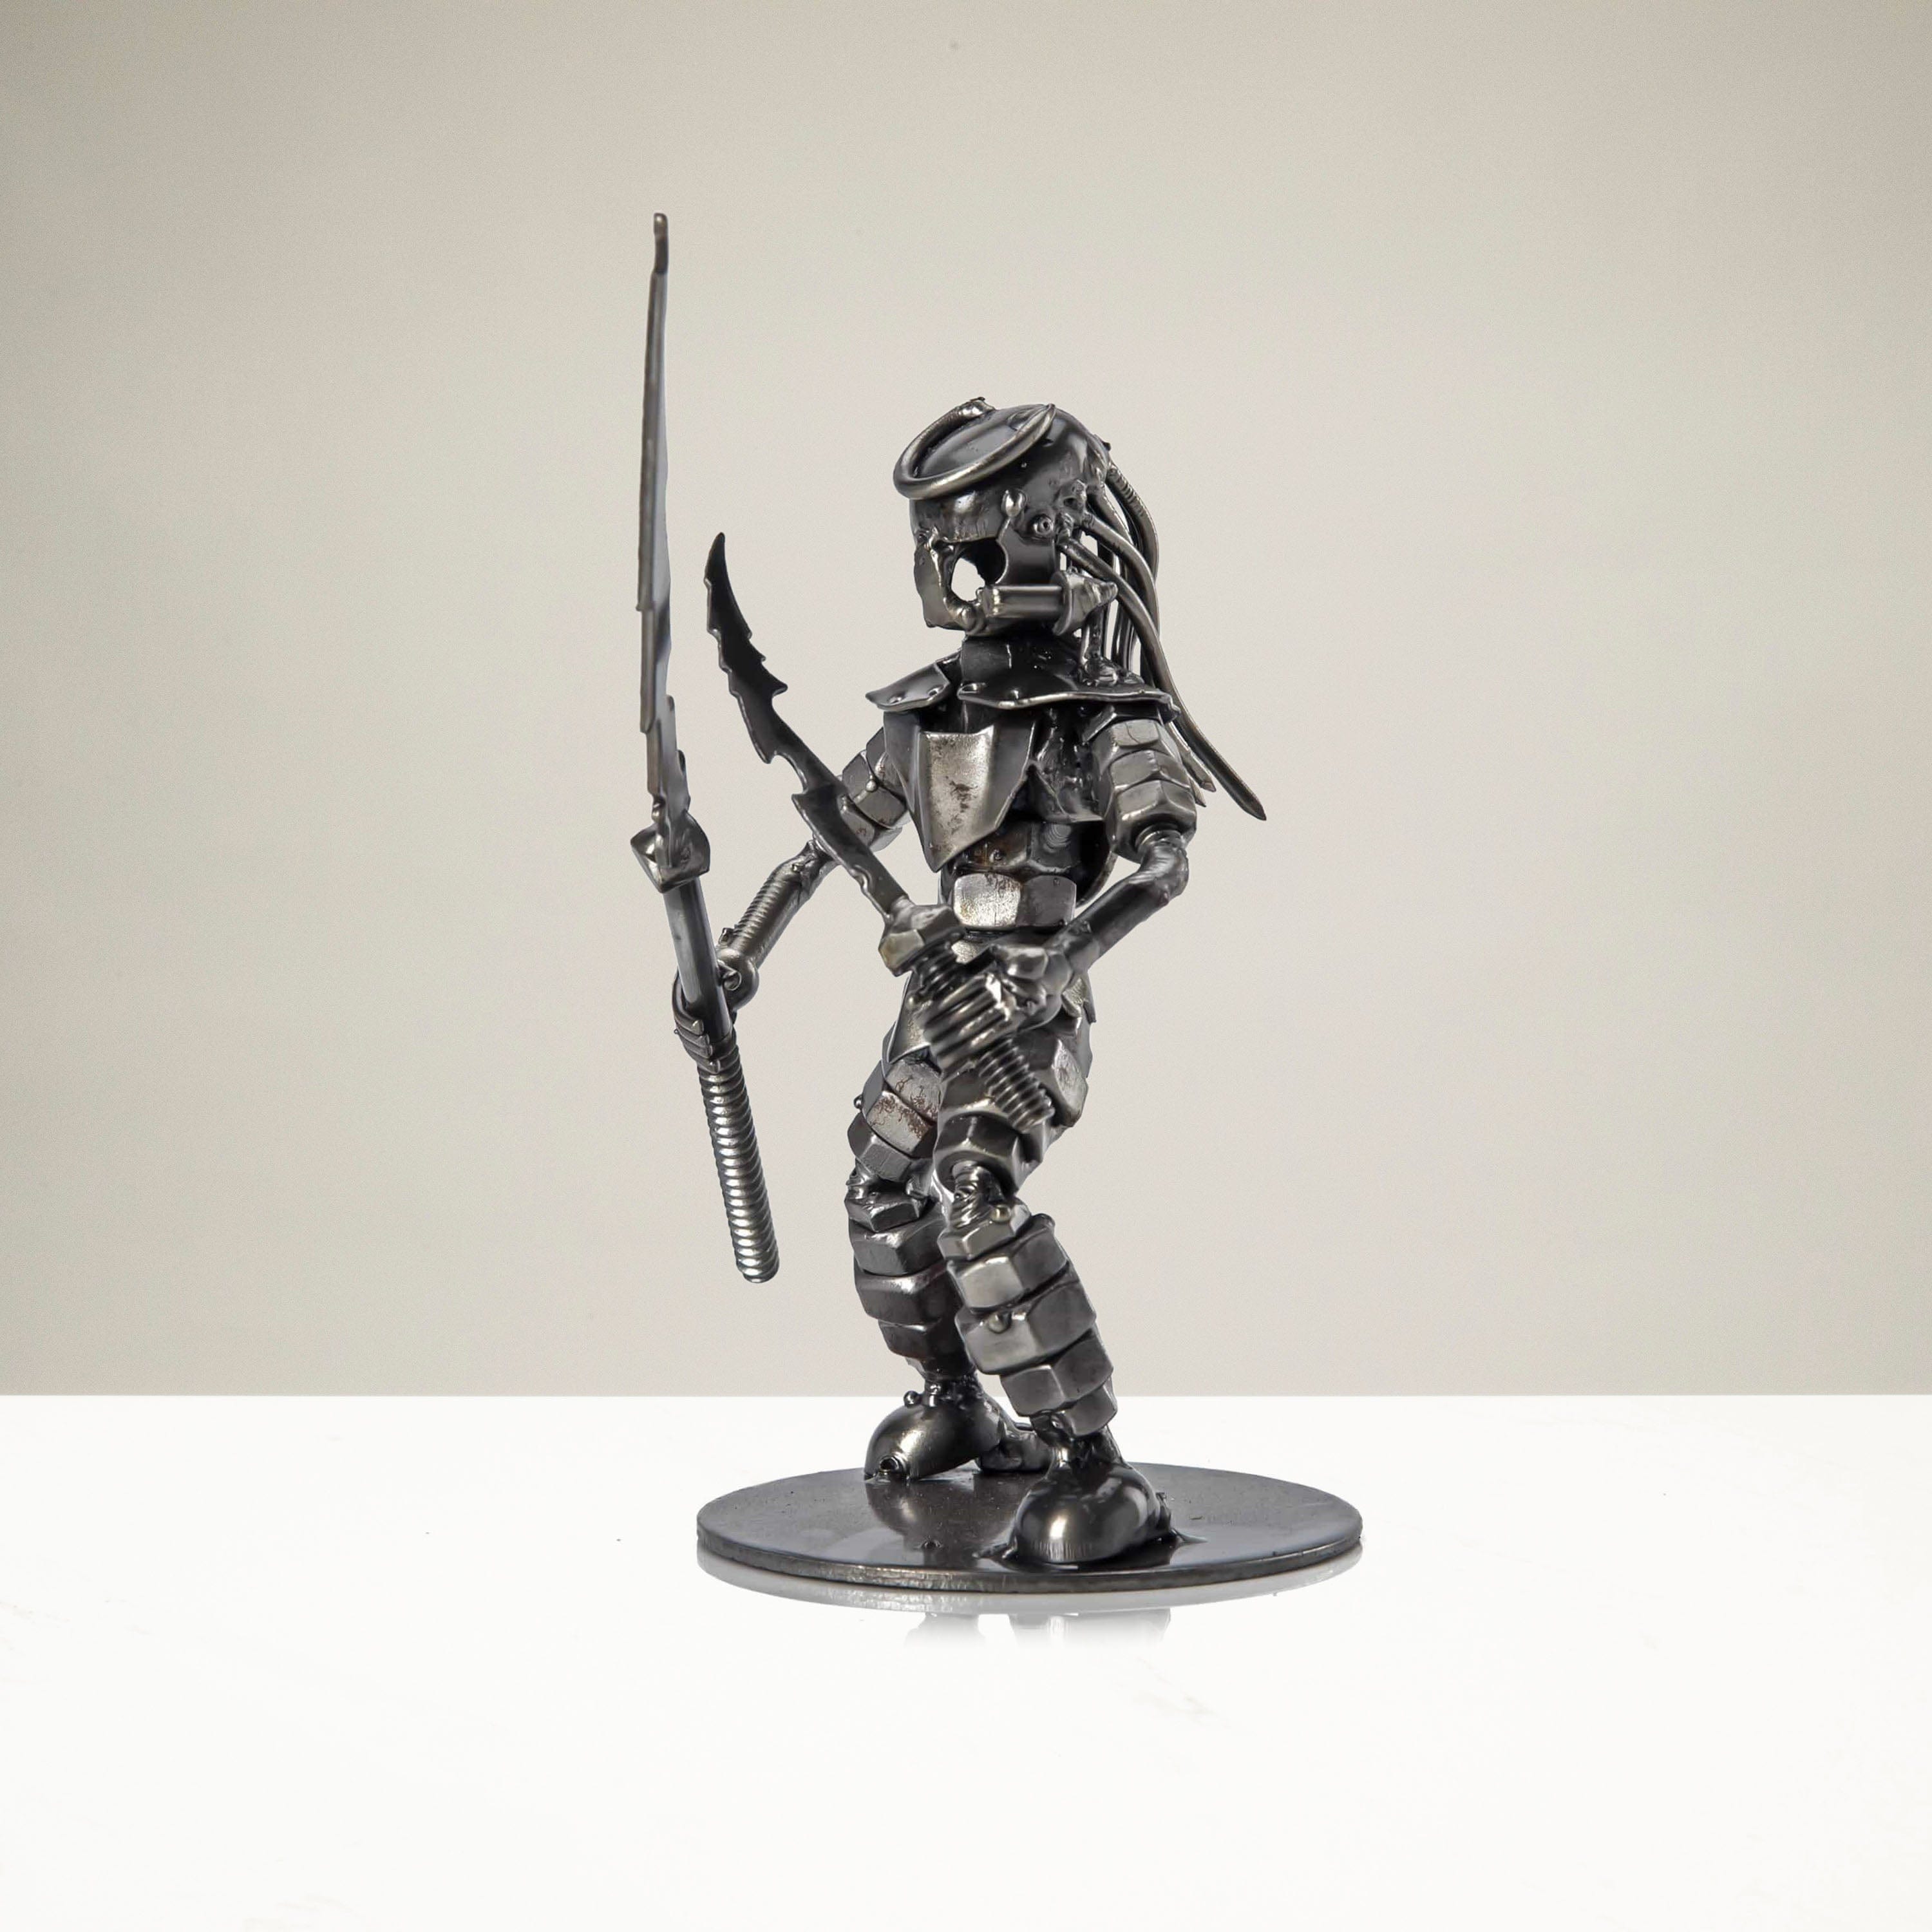 Kalifano Recycled Metal Art Dual Wielding Predator with Spear Inspired Recycled Metal Sculpture RMS-250PC-N